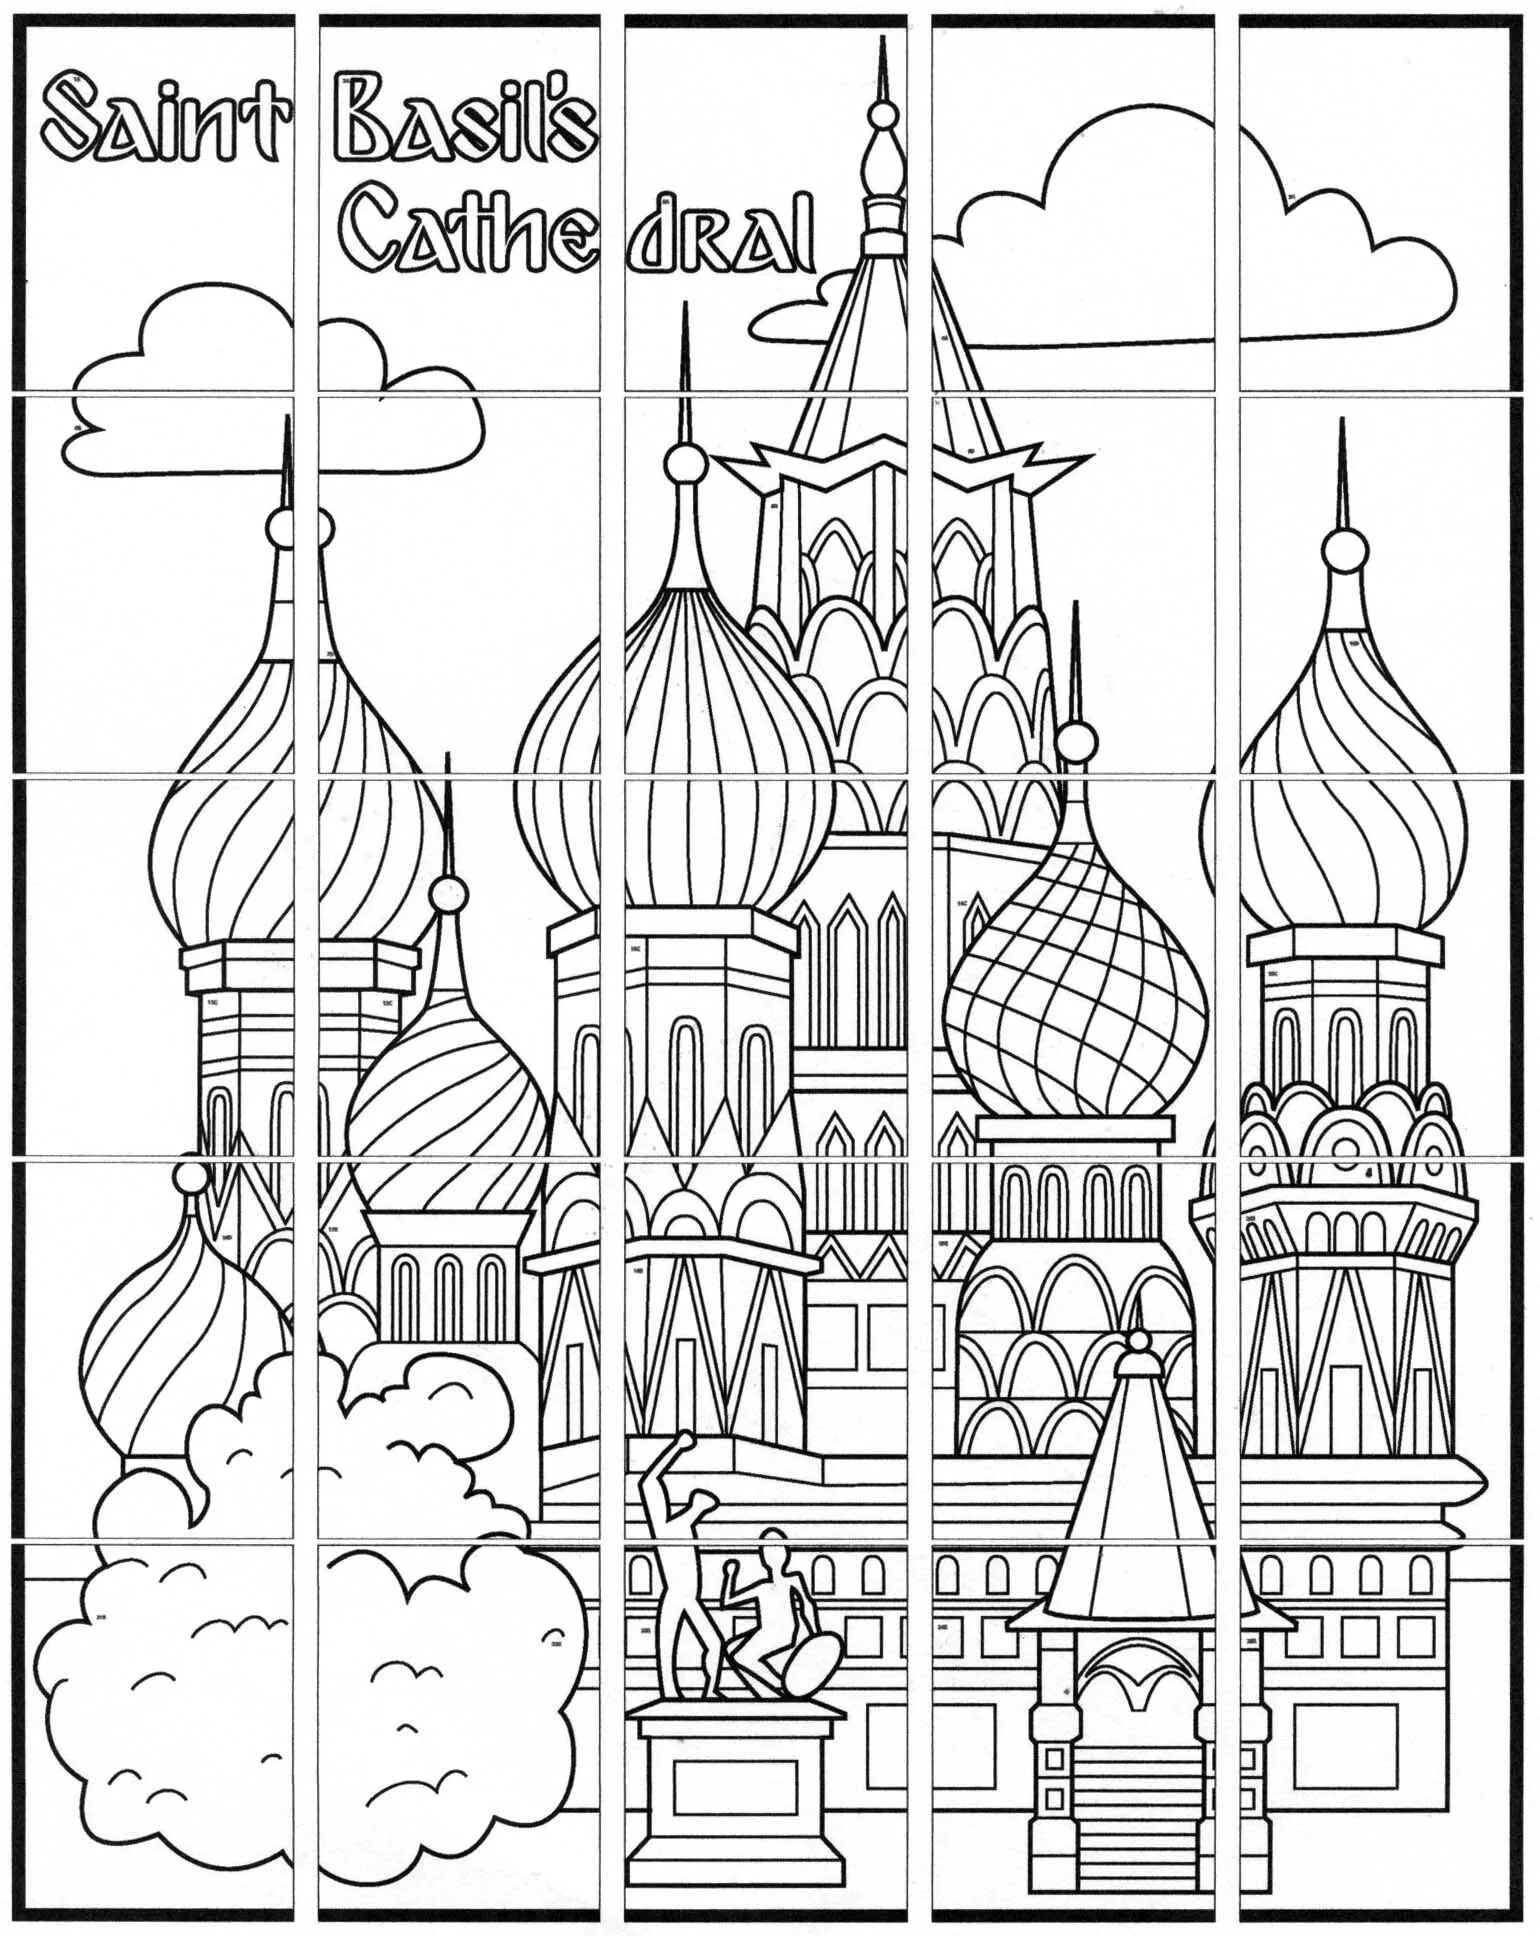 St. Basil's Cathedral for children #11